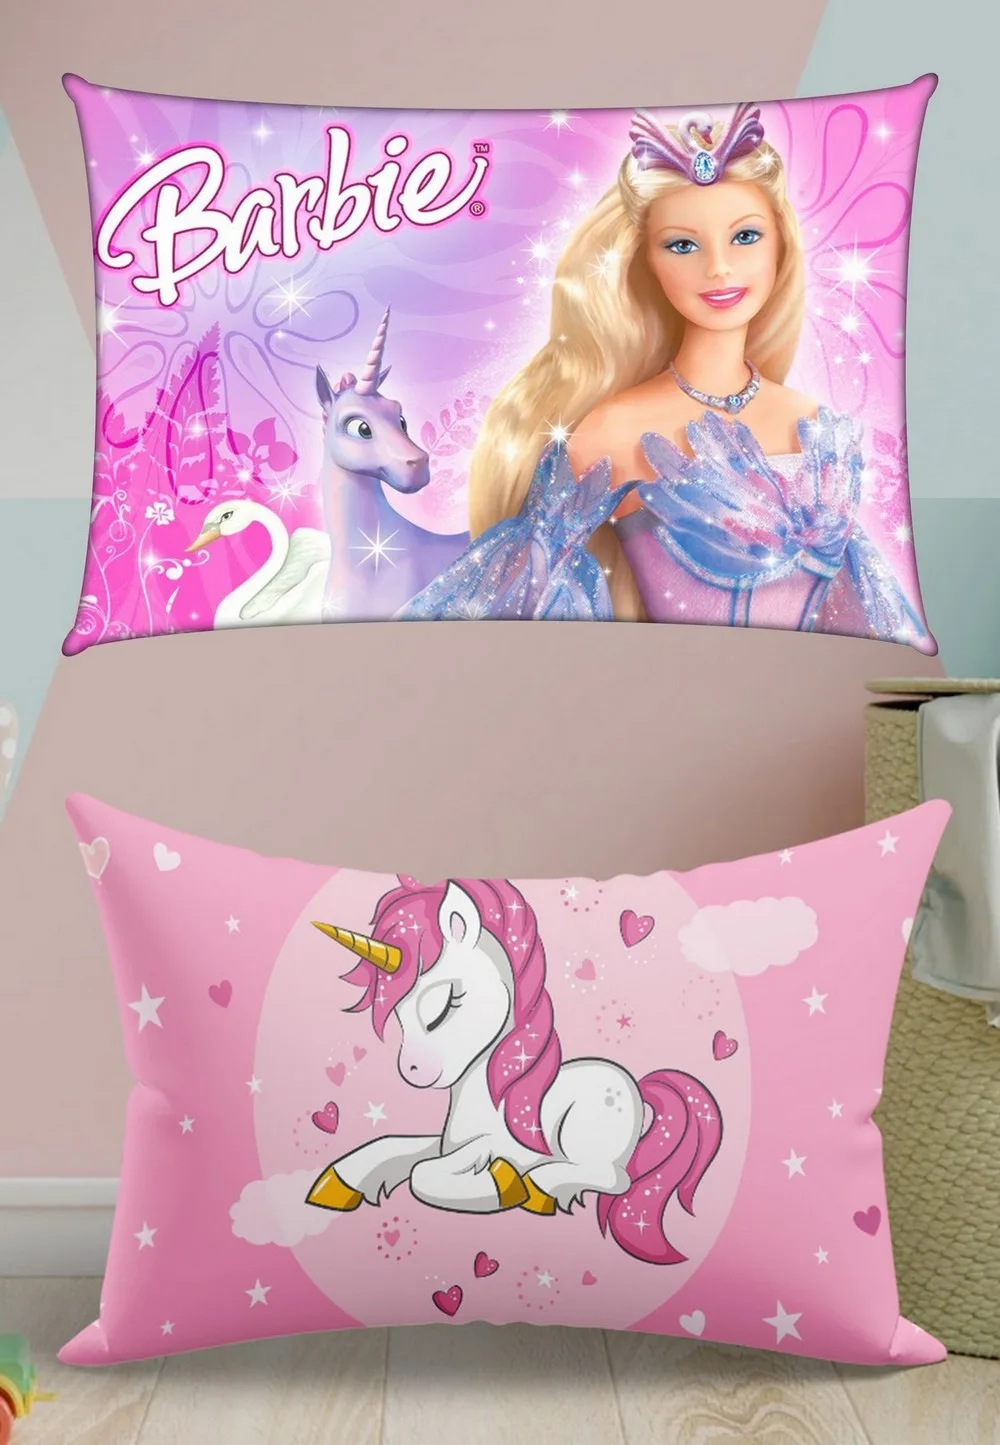 Unicorn Pillow, Barbie Cover, 18x12 Inches, Set of 2